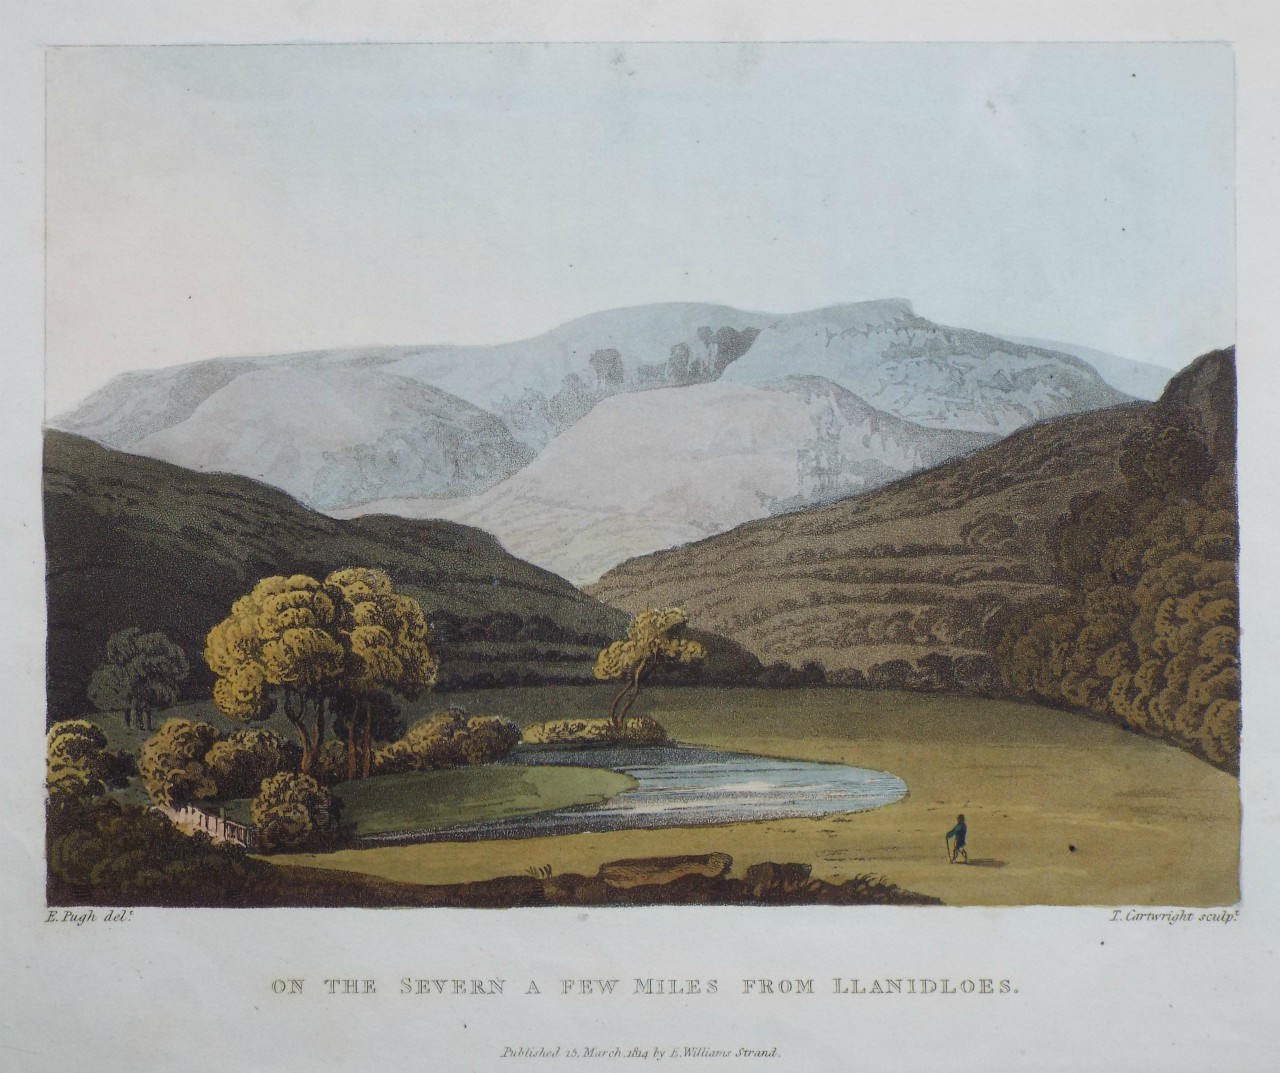 Aquatint - On the Severn a Few Miles from Llanidloes. - Cartwright